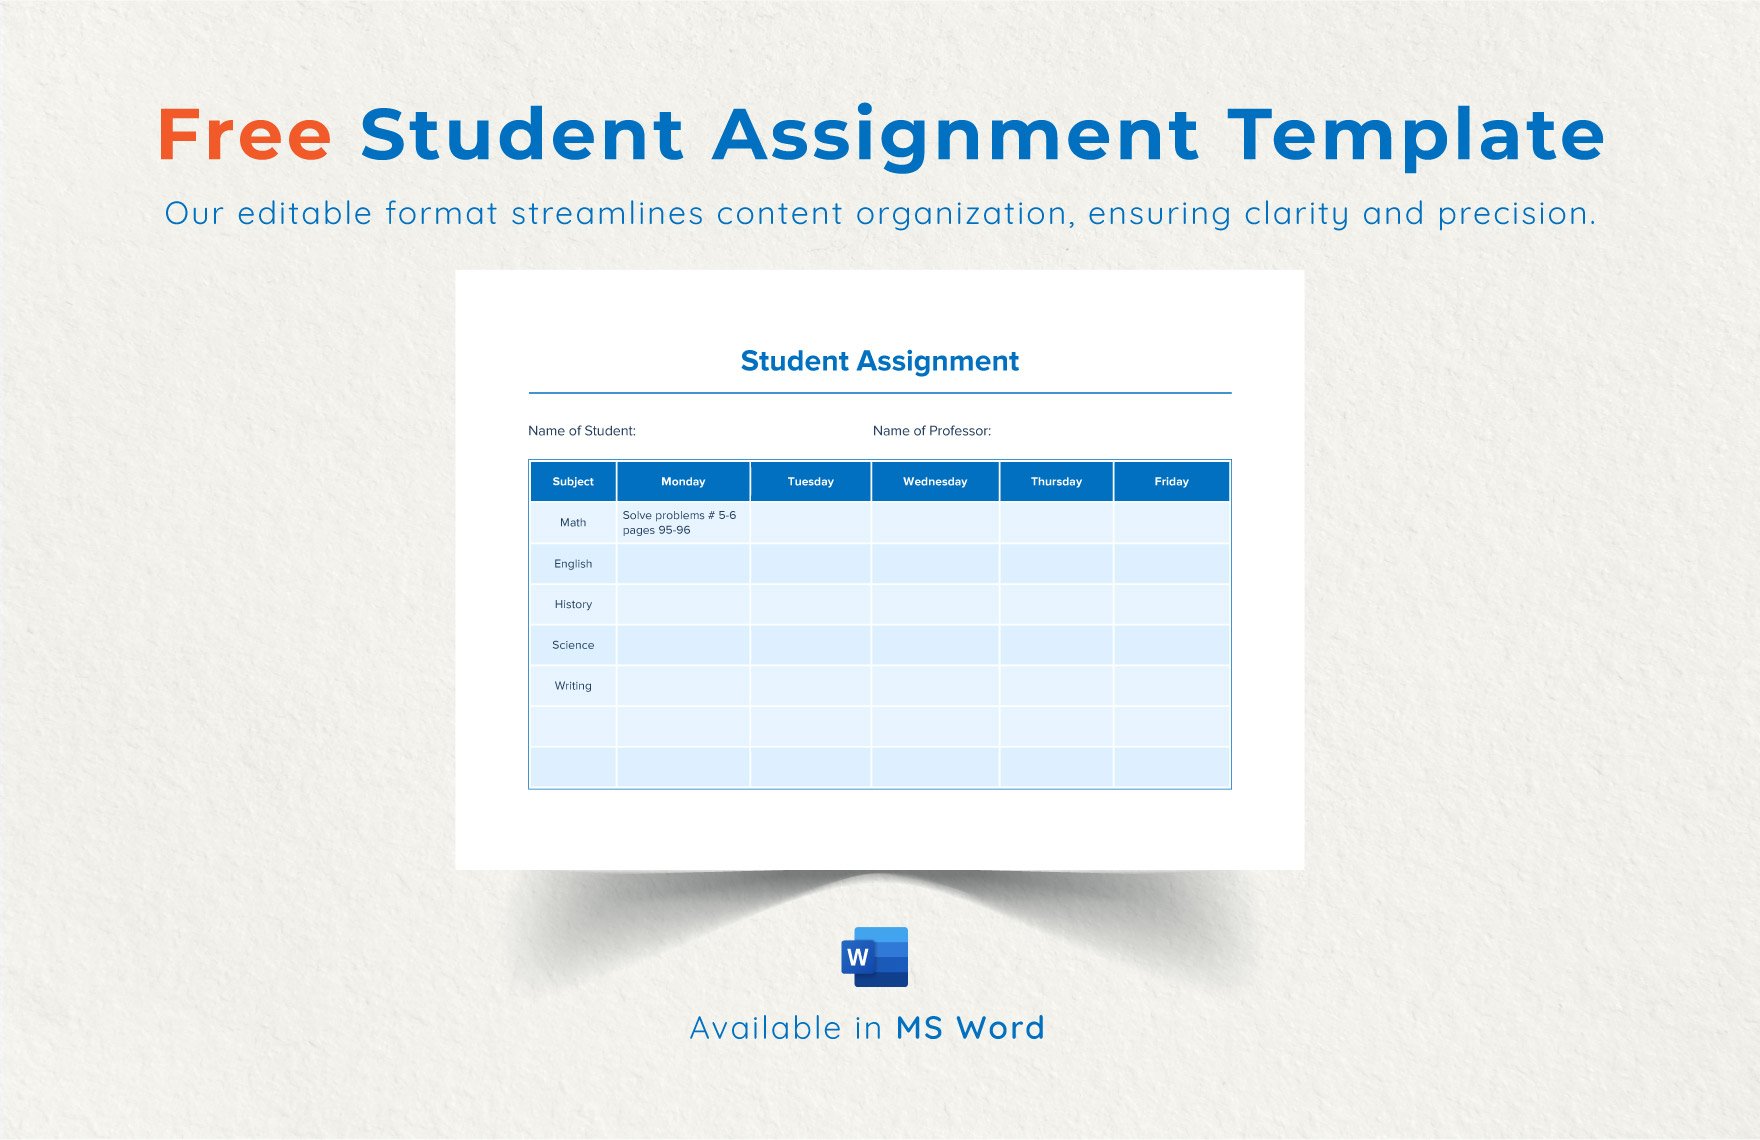 Free Student Assignment Template in Word